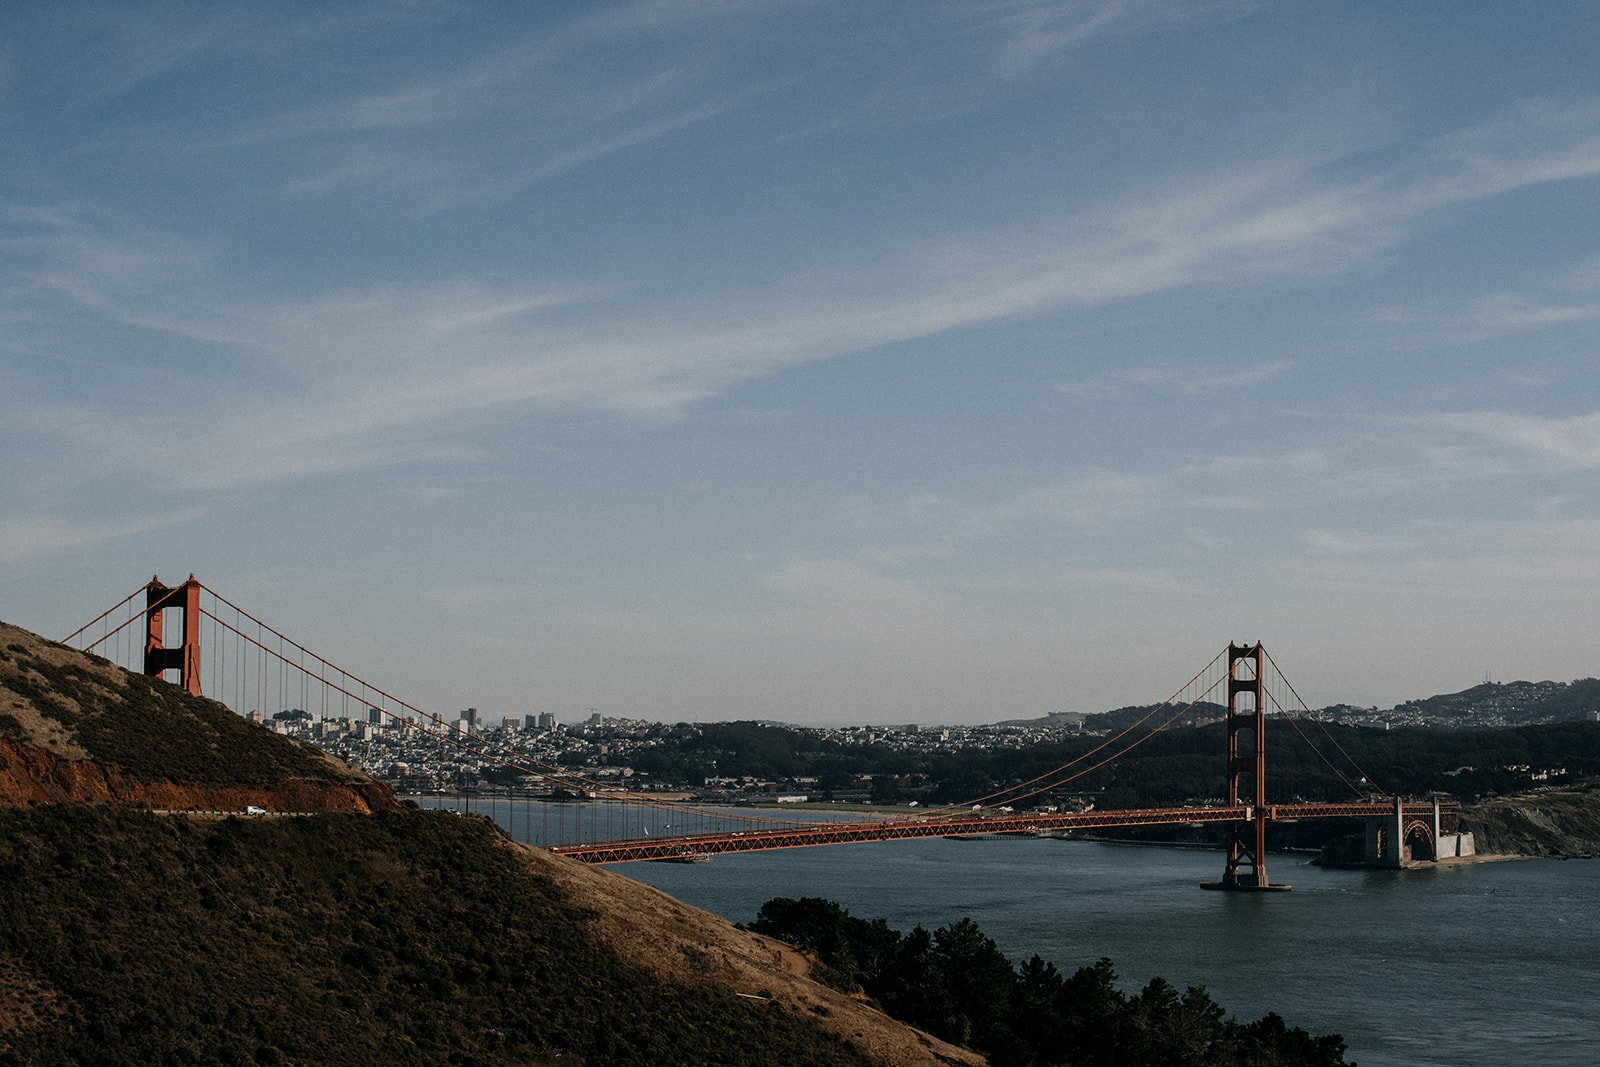  view of golden gate bridge and city  